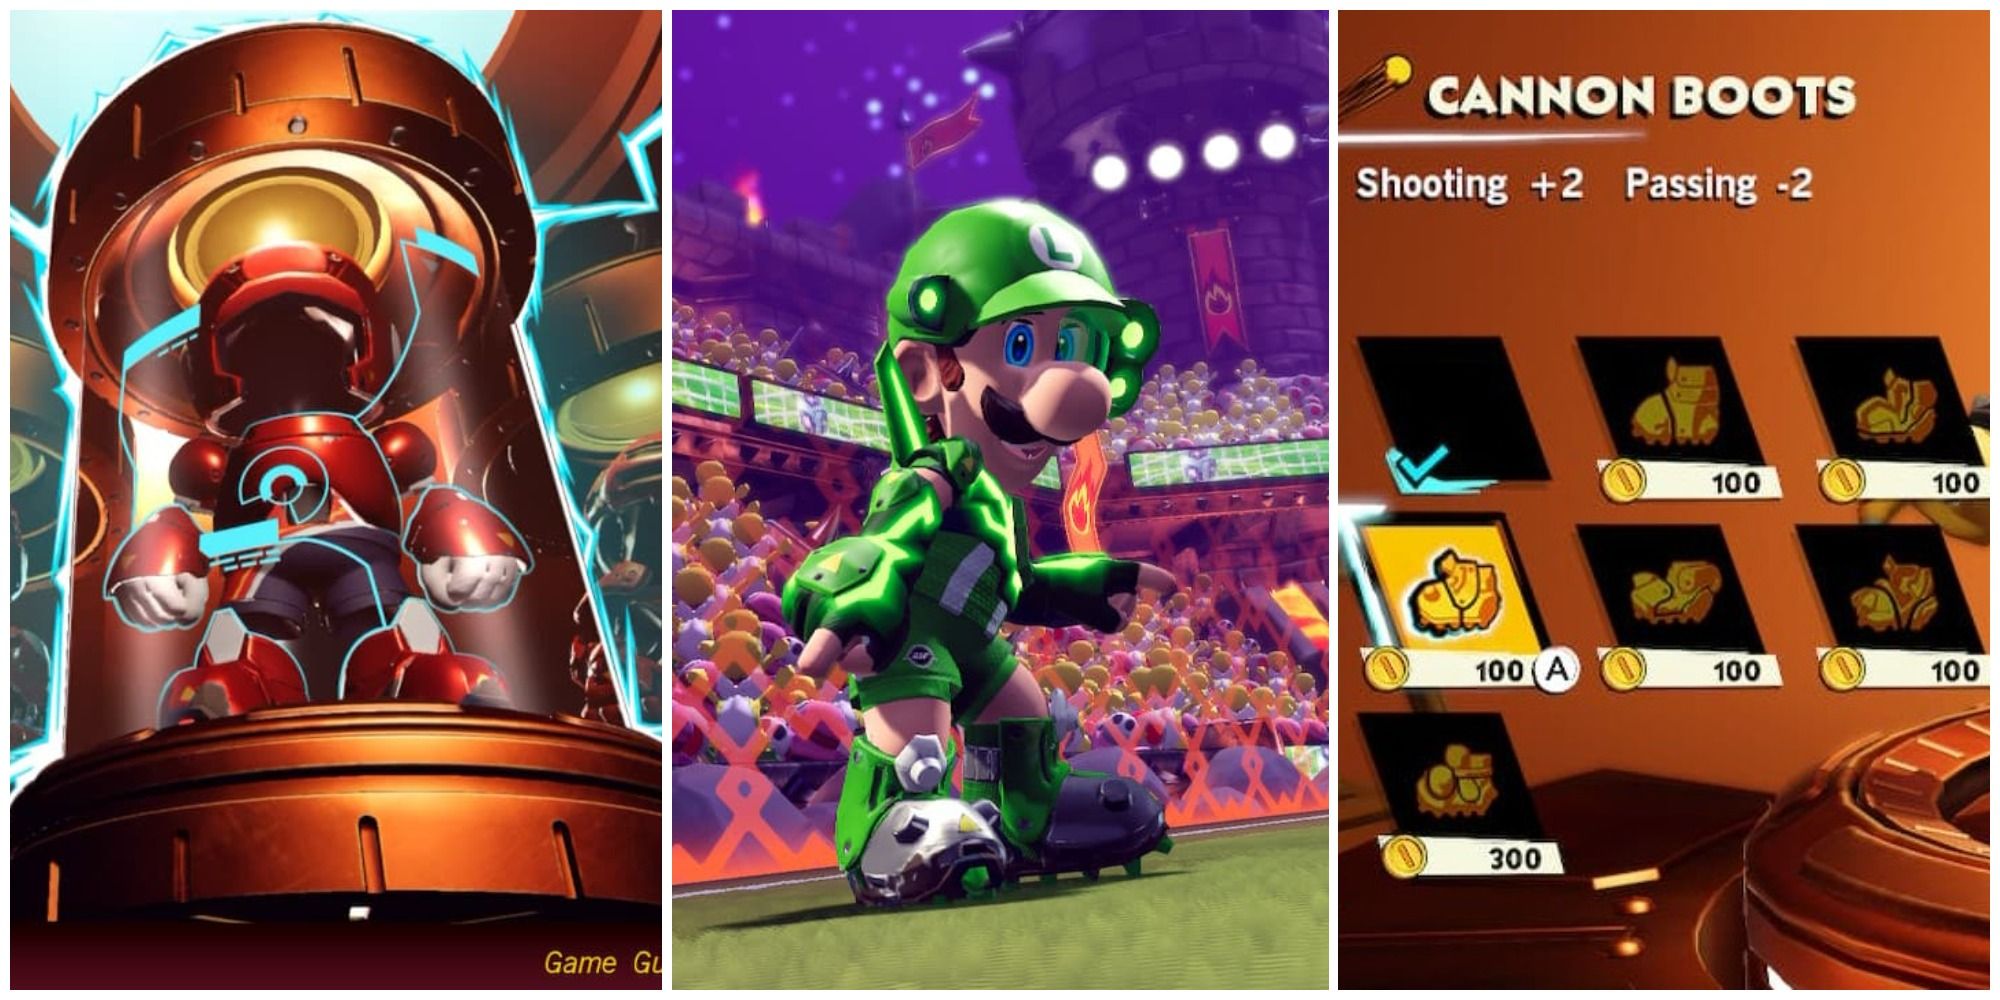 Split feature image featuring screenshots of a gear set on the main menu, Luigi celebrating a goal while wearing gear, and the boot selection screen